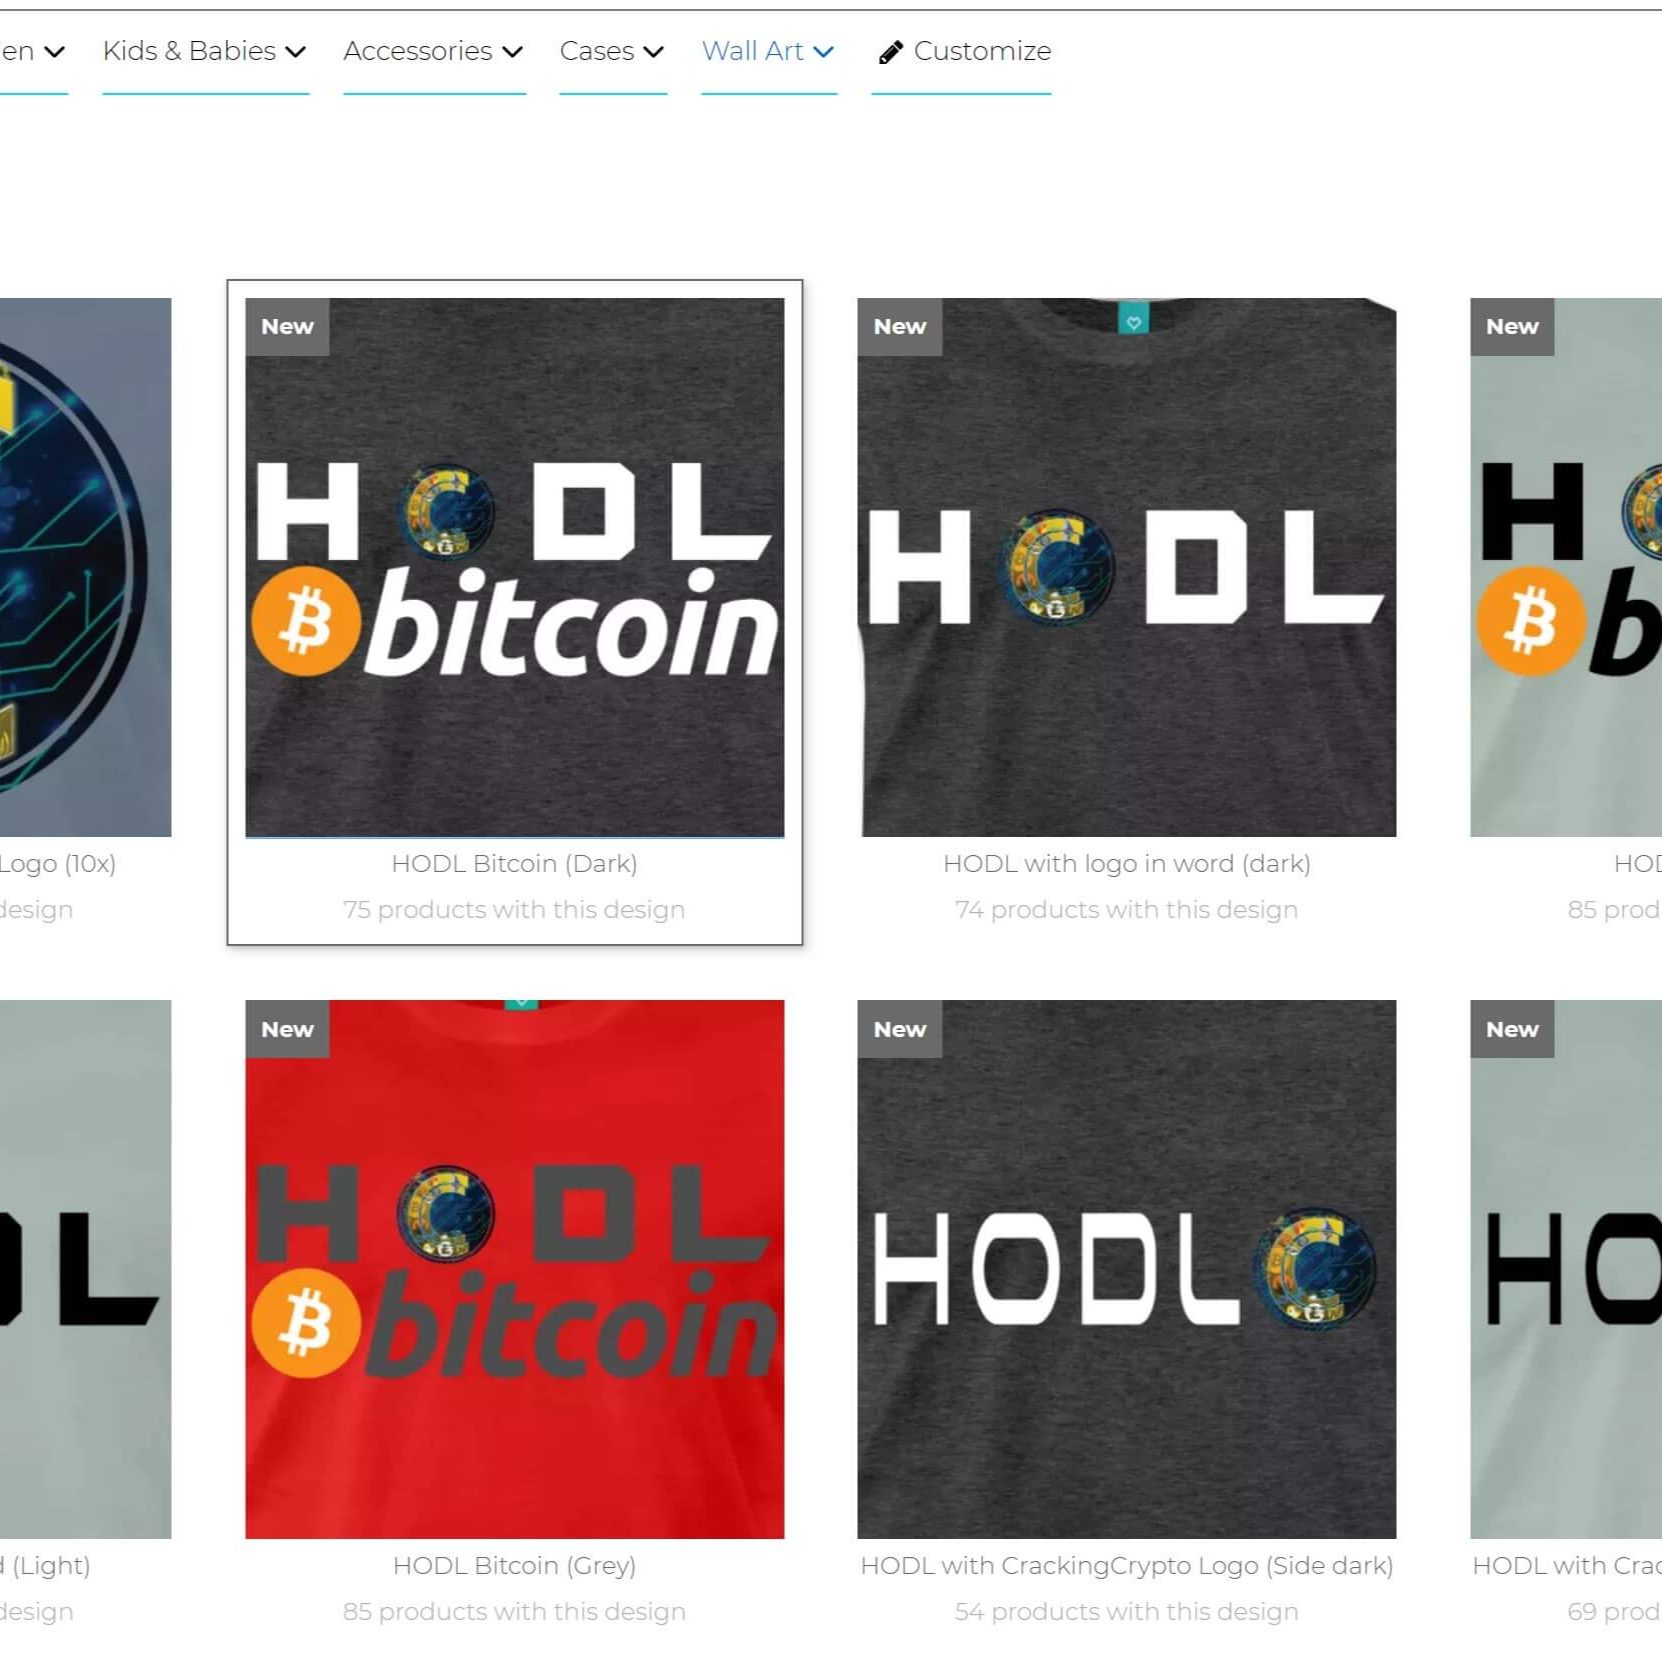 Screenshot of the Cracking Crypto Merch design options on the shop page